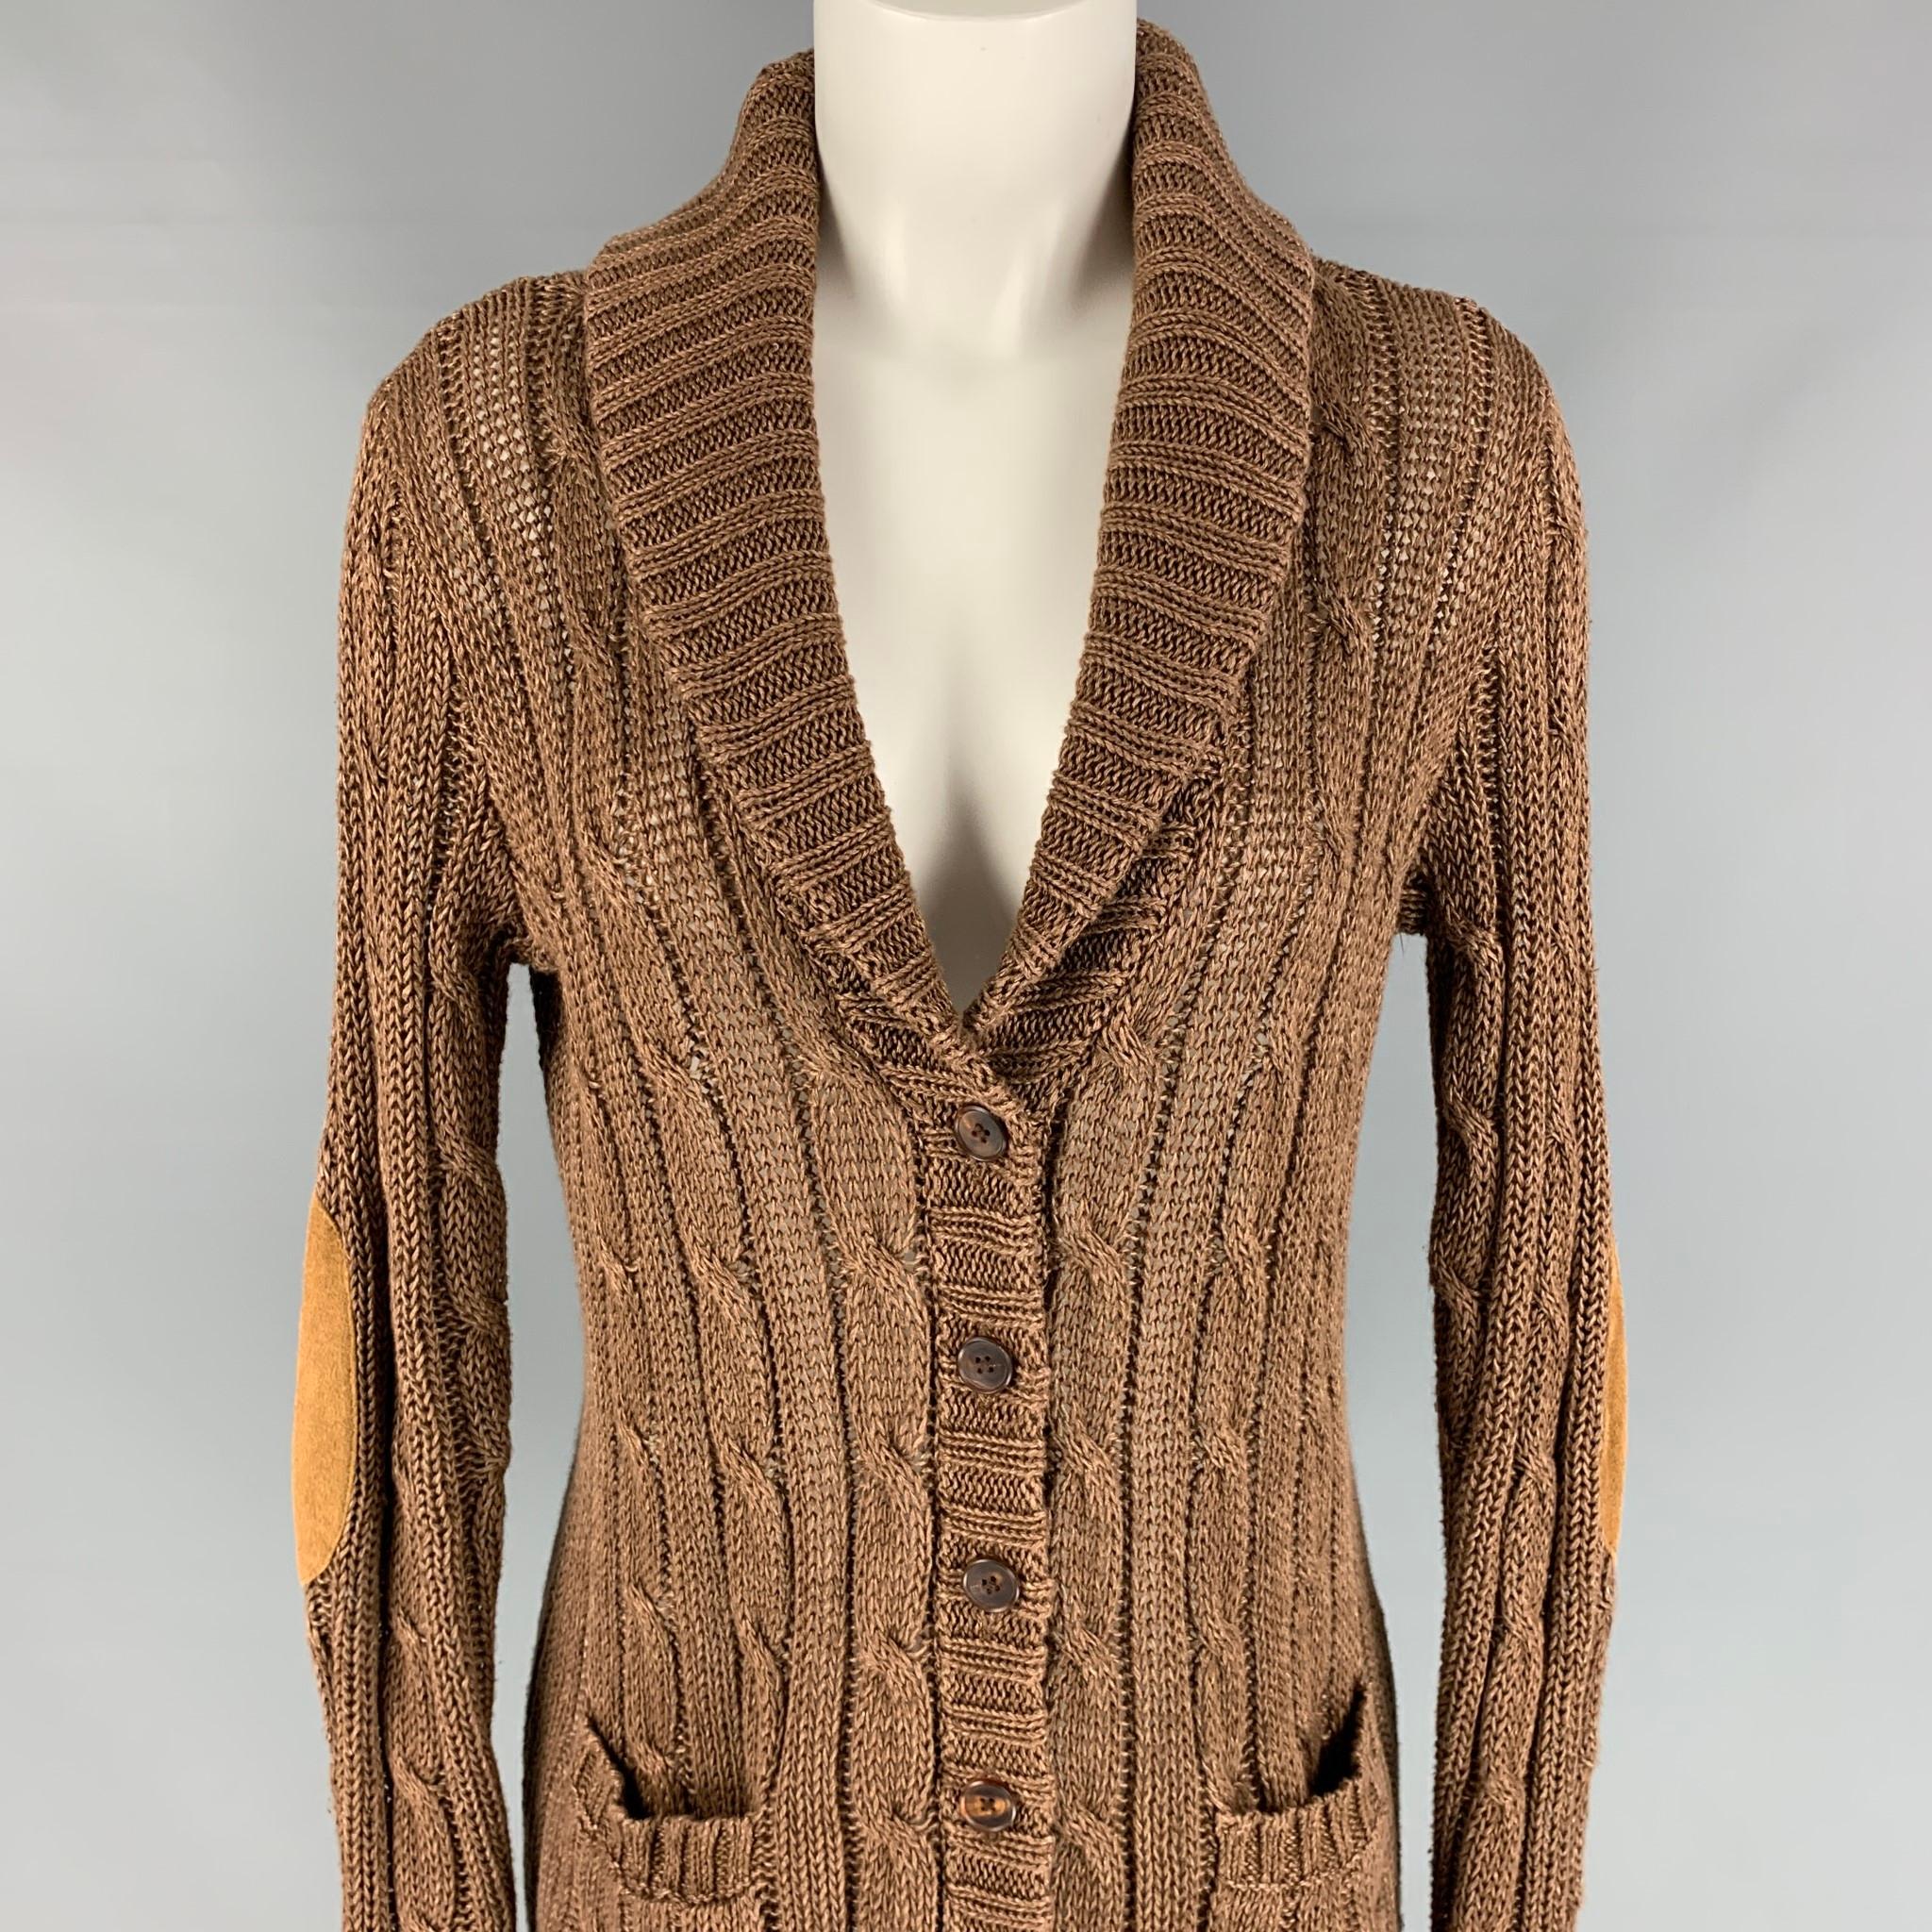 RALPH LAUREN cardigan comes in a brown linen featuring a shawl collar, suede elbow patches, front pockets, and a buttoned closure. 

Very Good Pre-Owned Condition.
Marked: S

Measurements:

Shoulder: 17 in.
Bust: 34 in.
Sleeve: 26 in.
Length: 28.5